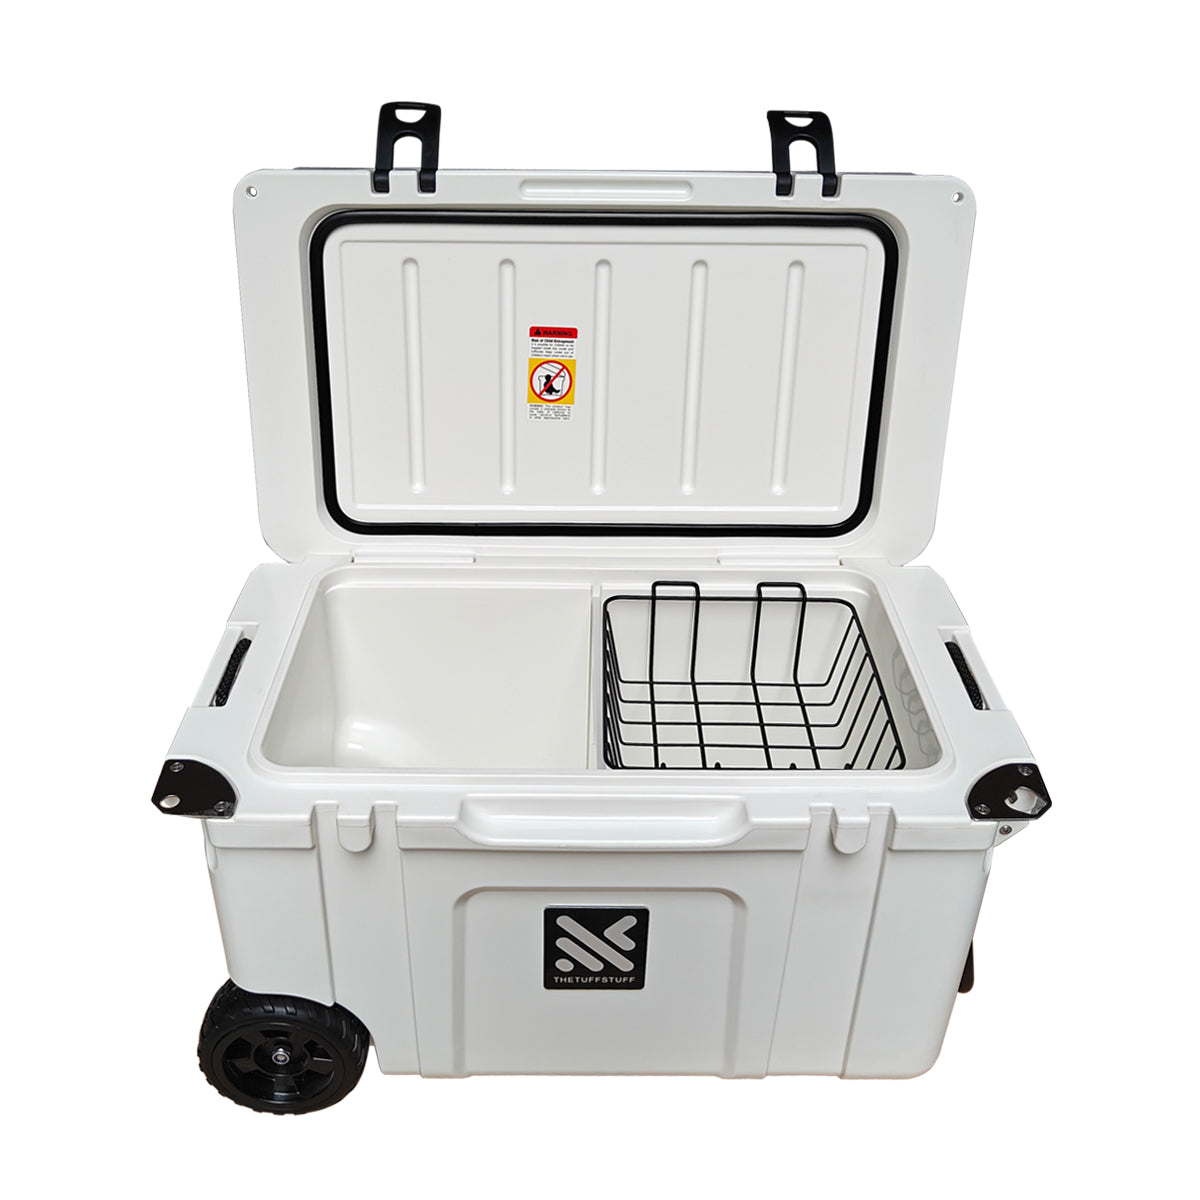 The Cool Cooler CC55 ***FREE SHIPPING 48 CONTIGUOUS STATES***